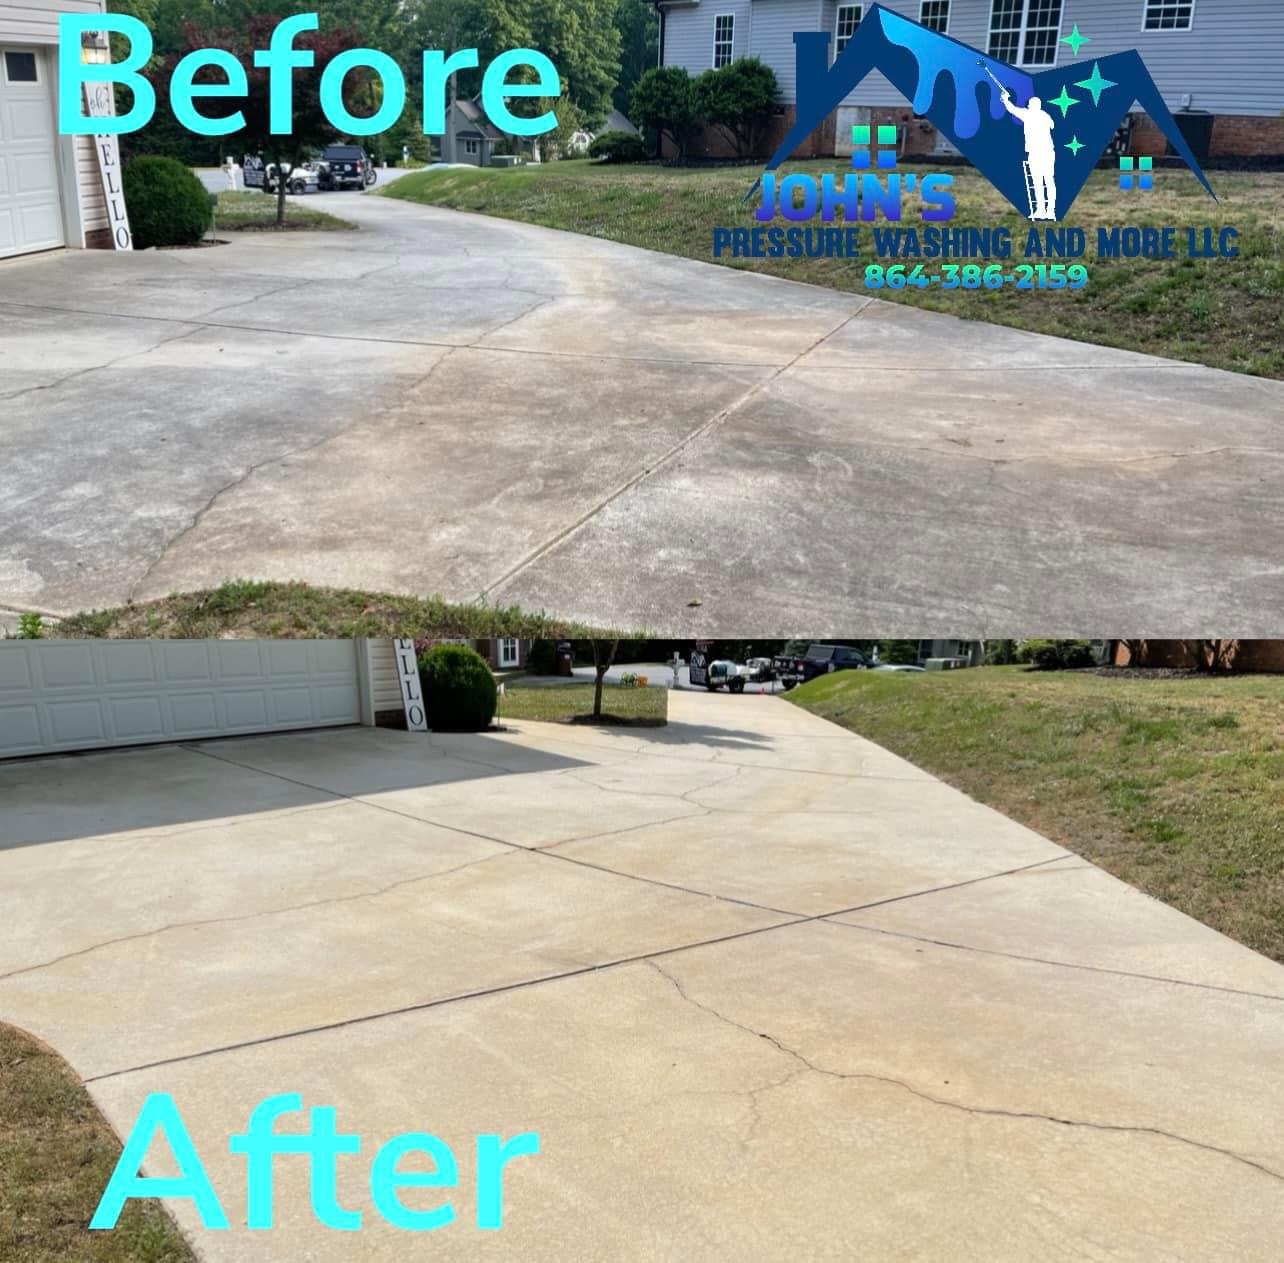 House Wash, Roof Wash, Gutter Cleaning, Gutter Brightening, & Driveway Cleaning in Easley, SC Image